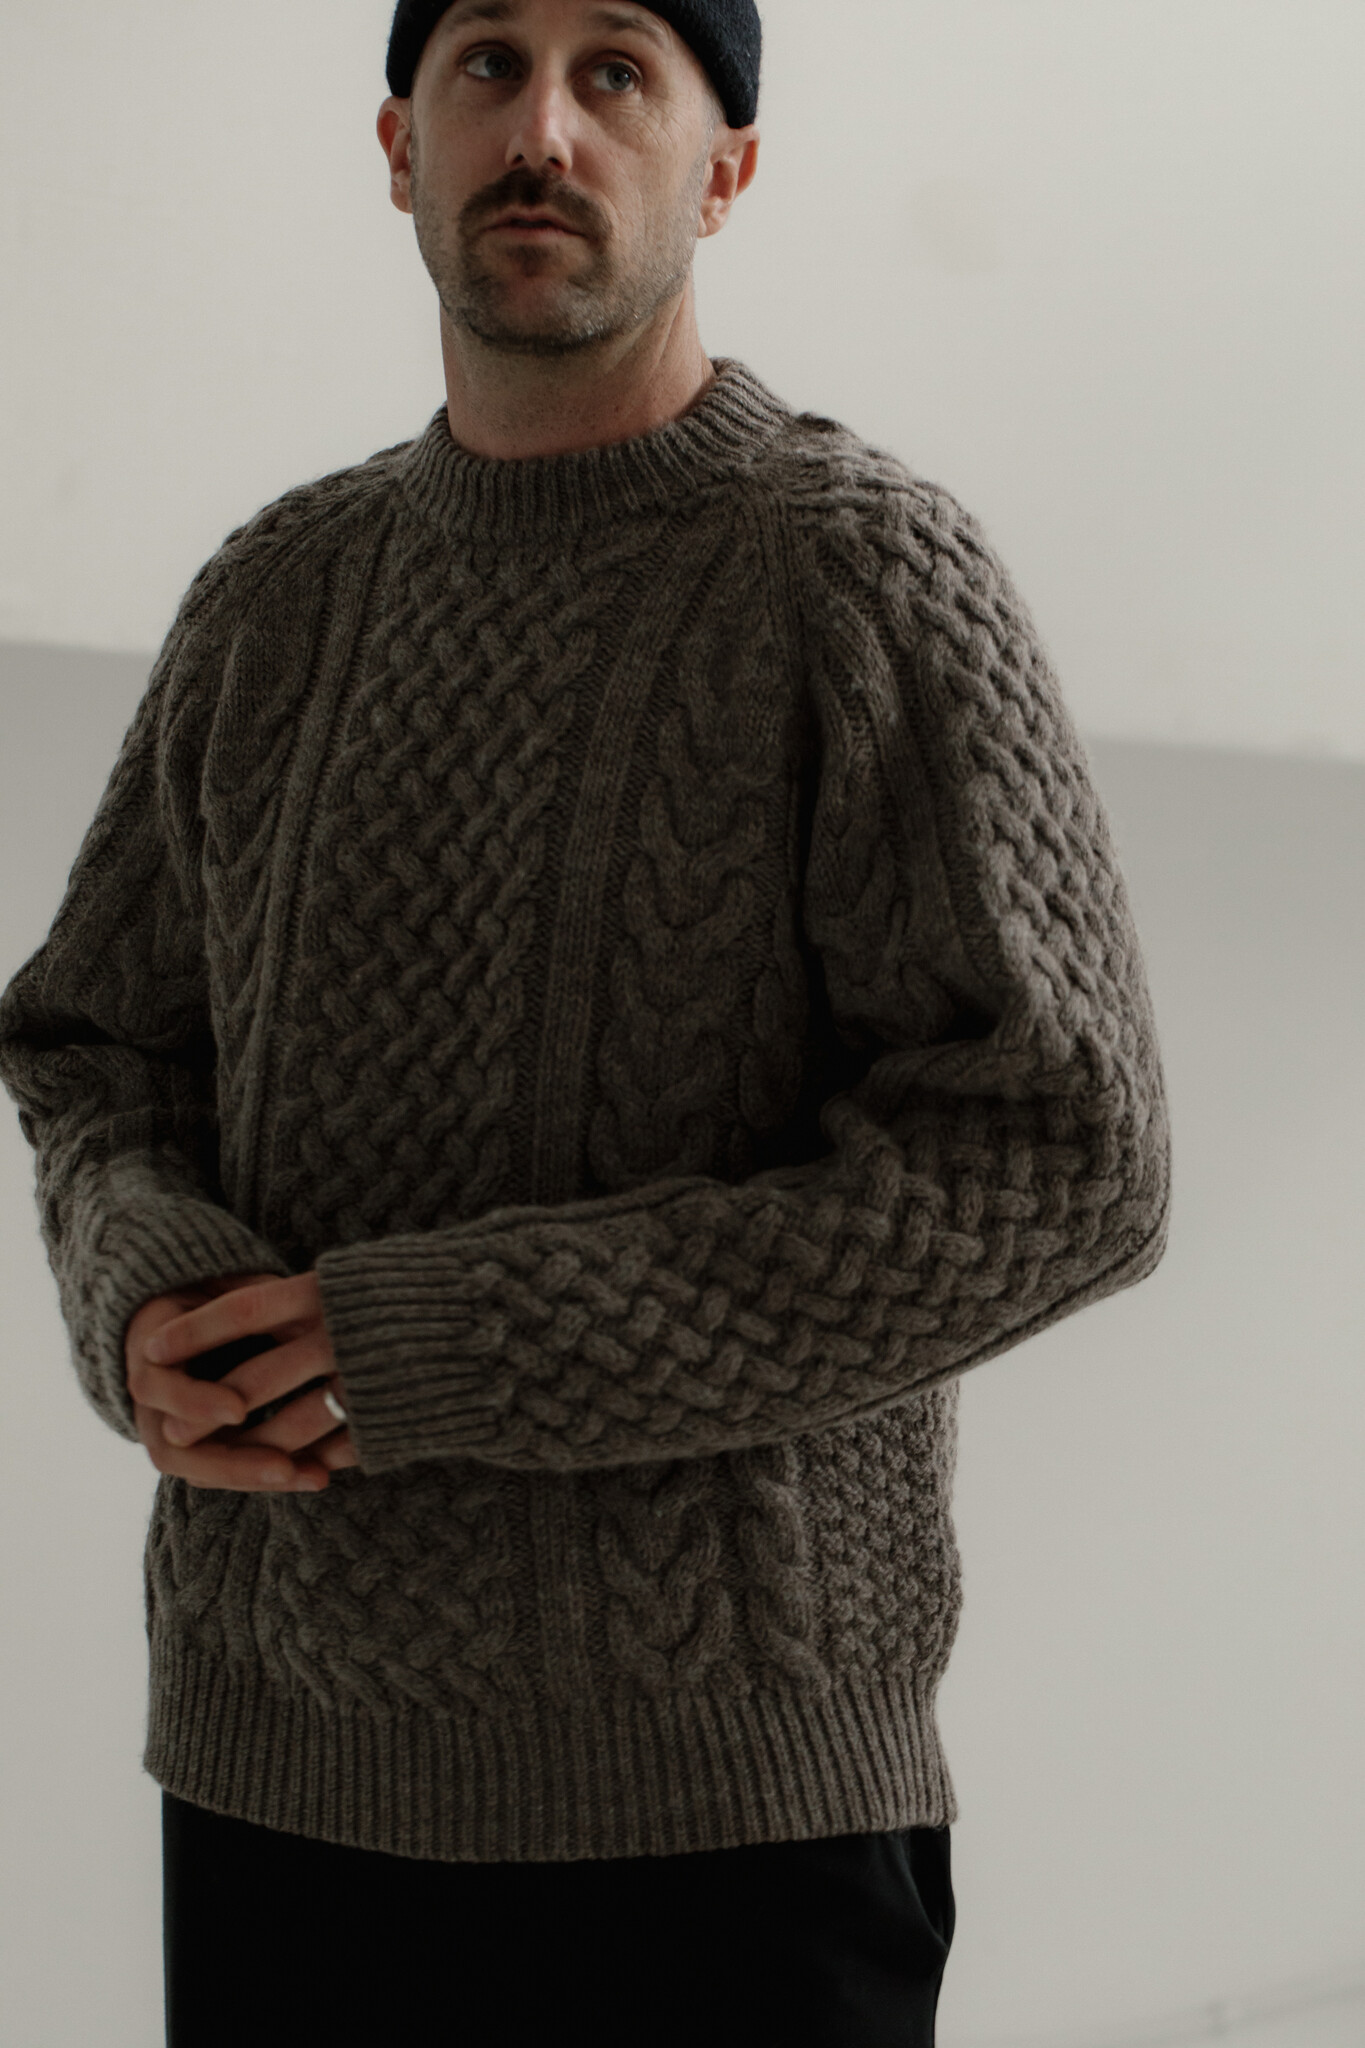 BARE KNITWEAR - Fossello's Quality Clothing Inc